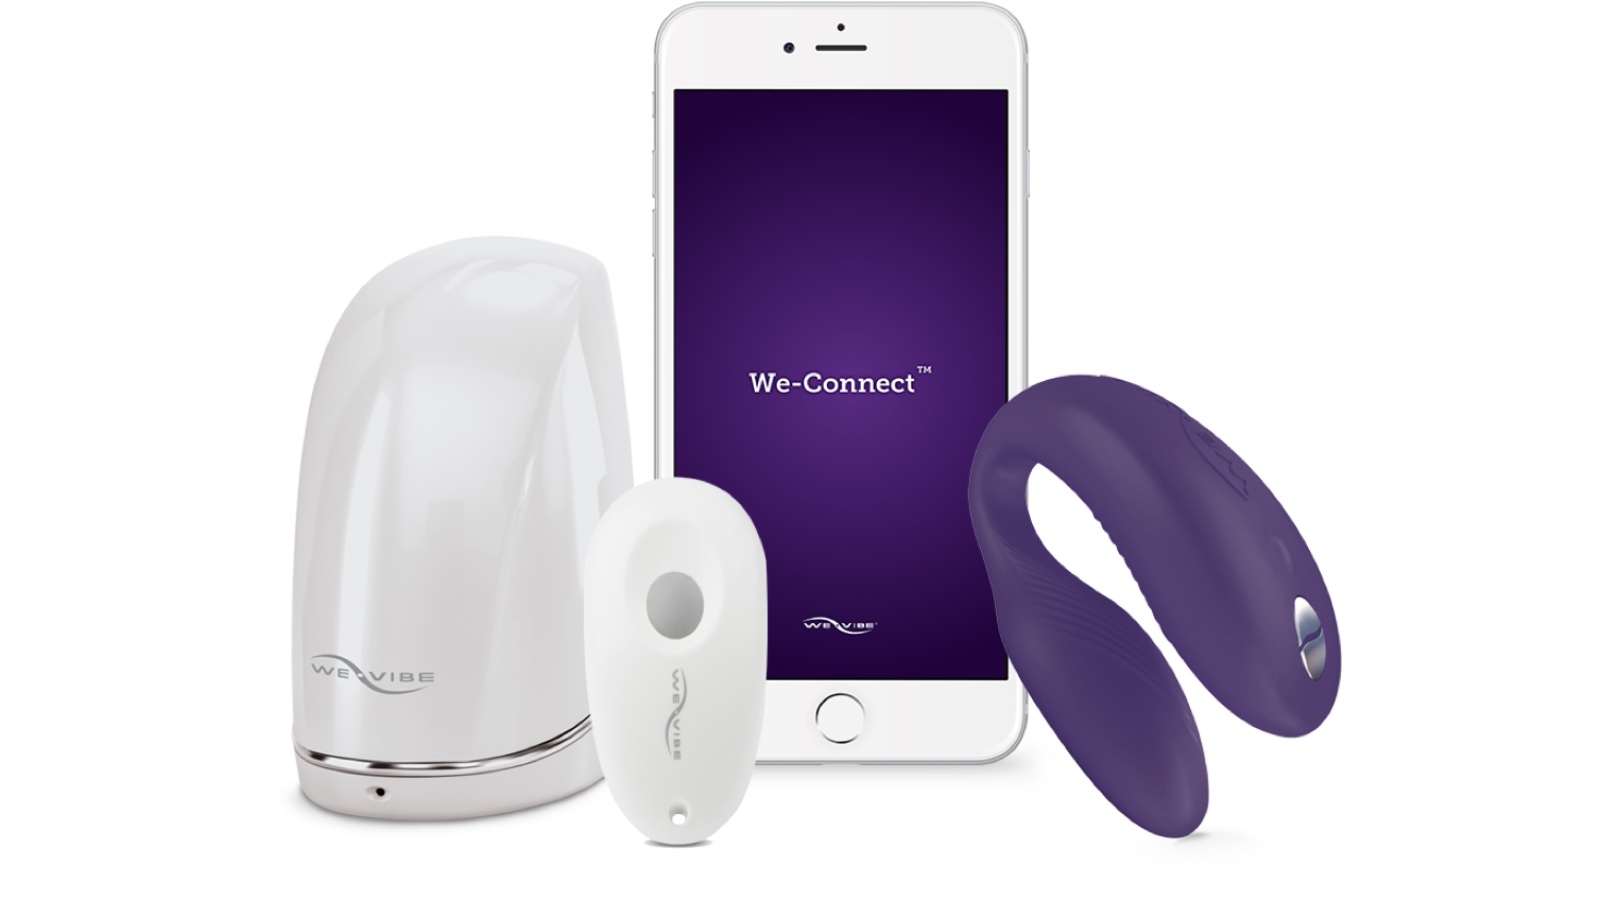 We-Vibe Sync including controller, stand and app in the best vibrator line up